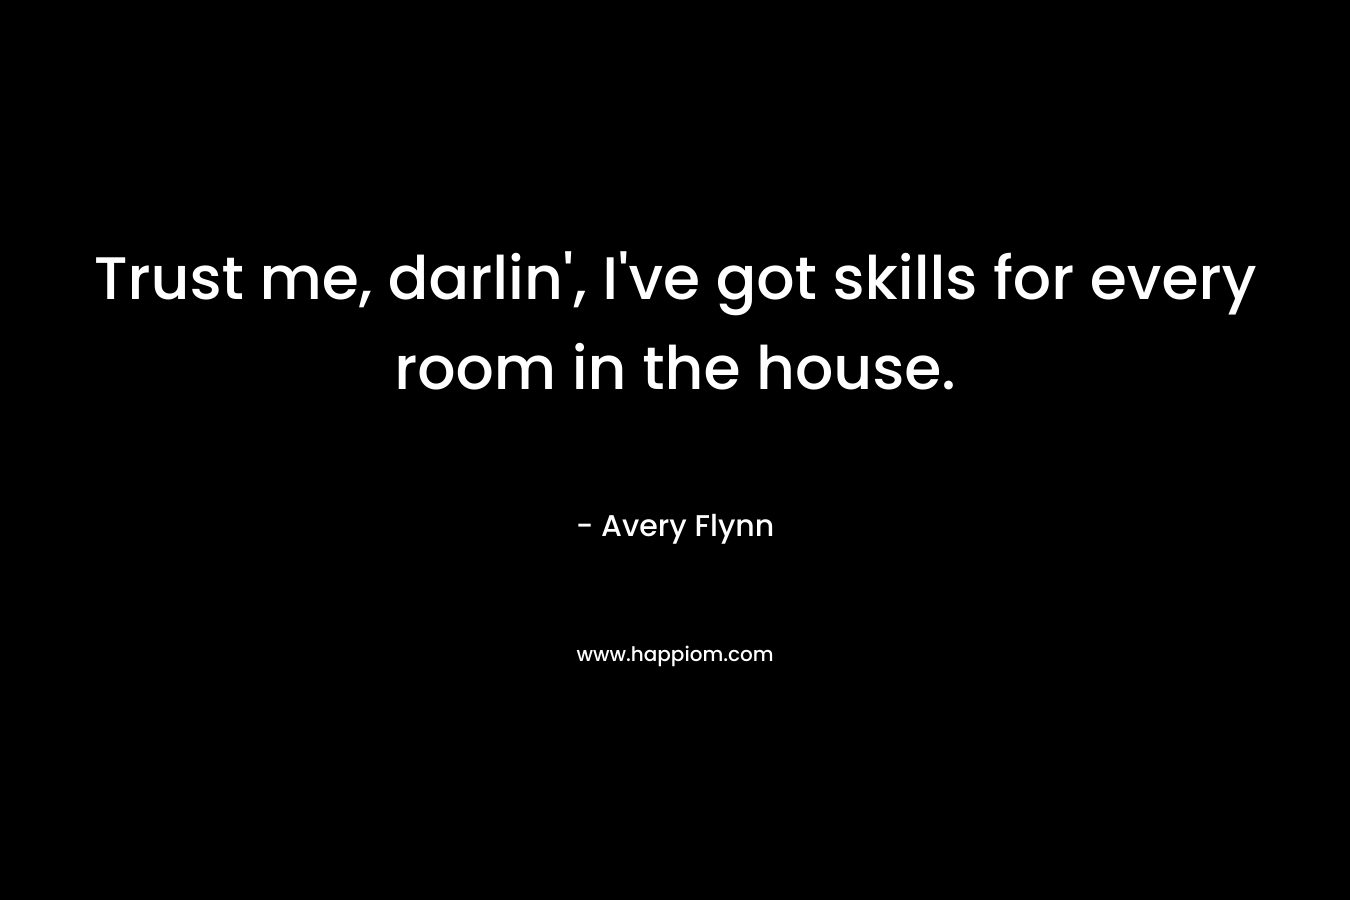 Trust me, darlin’, I’ve got skills for every room in the house. – Avery Flynn